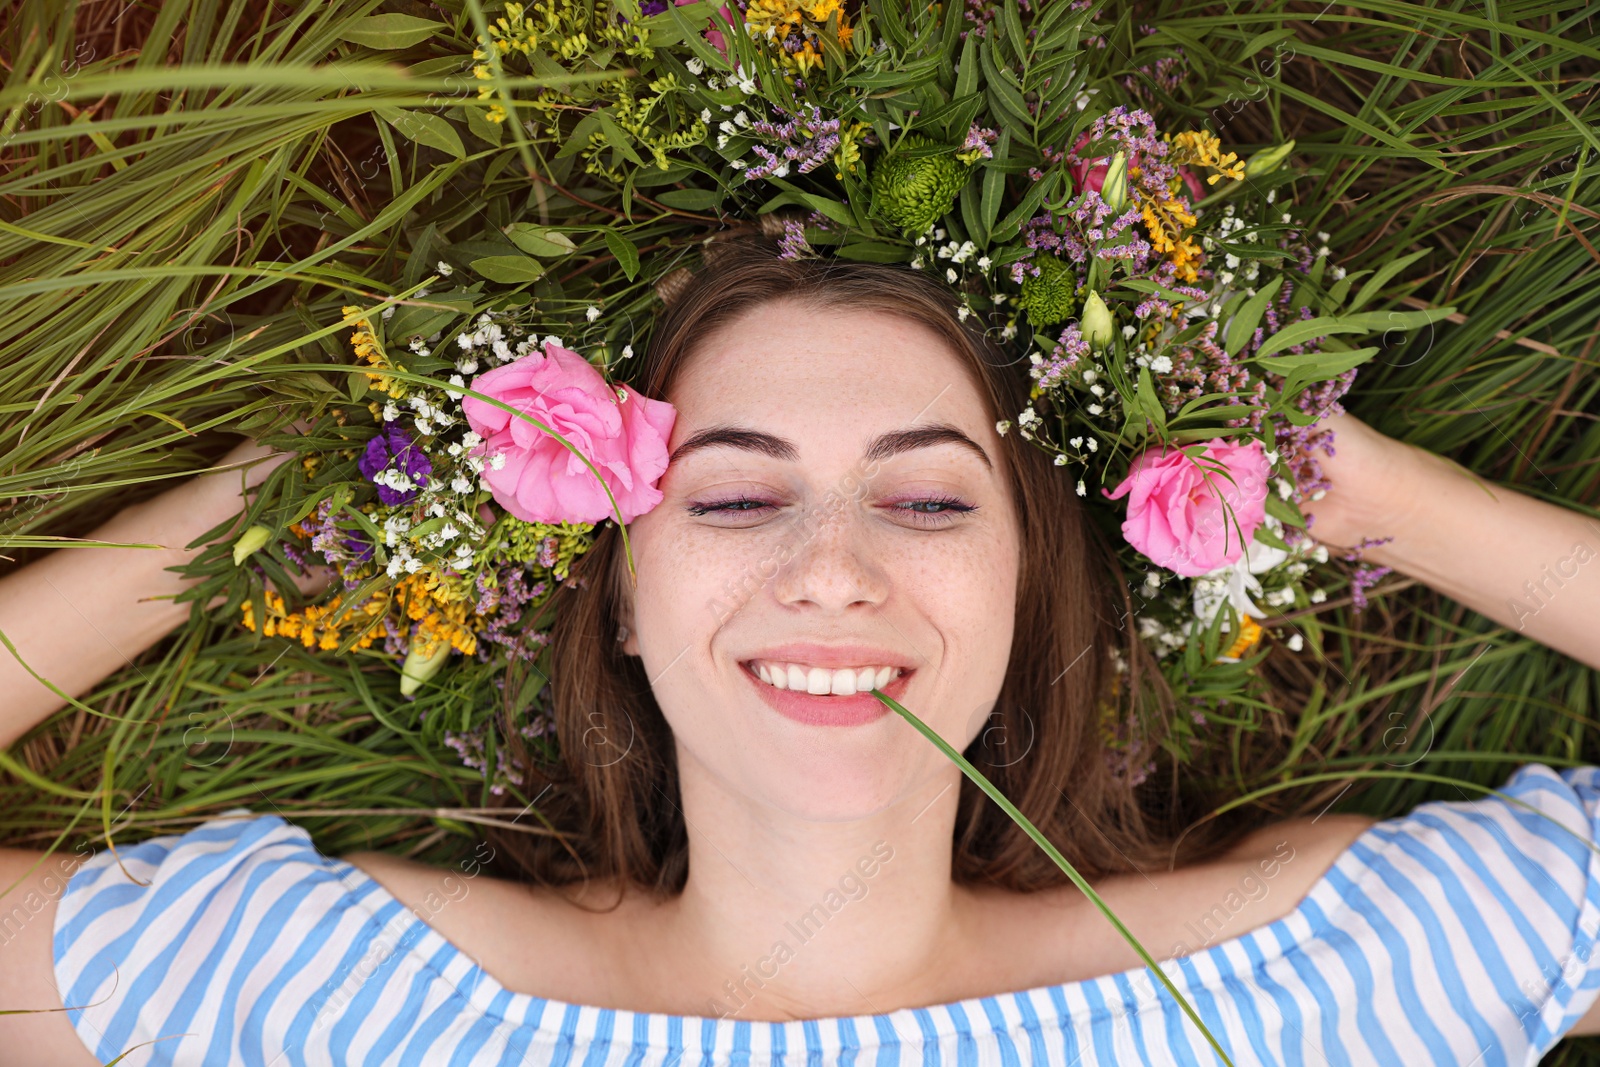 Photo of Young woman wearing wreath made of beautiful flowers on green grass, top view